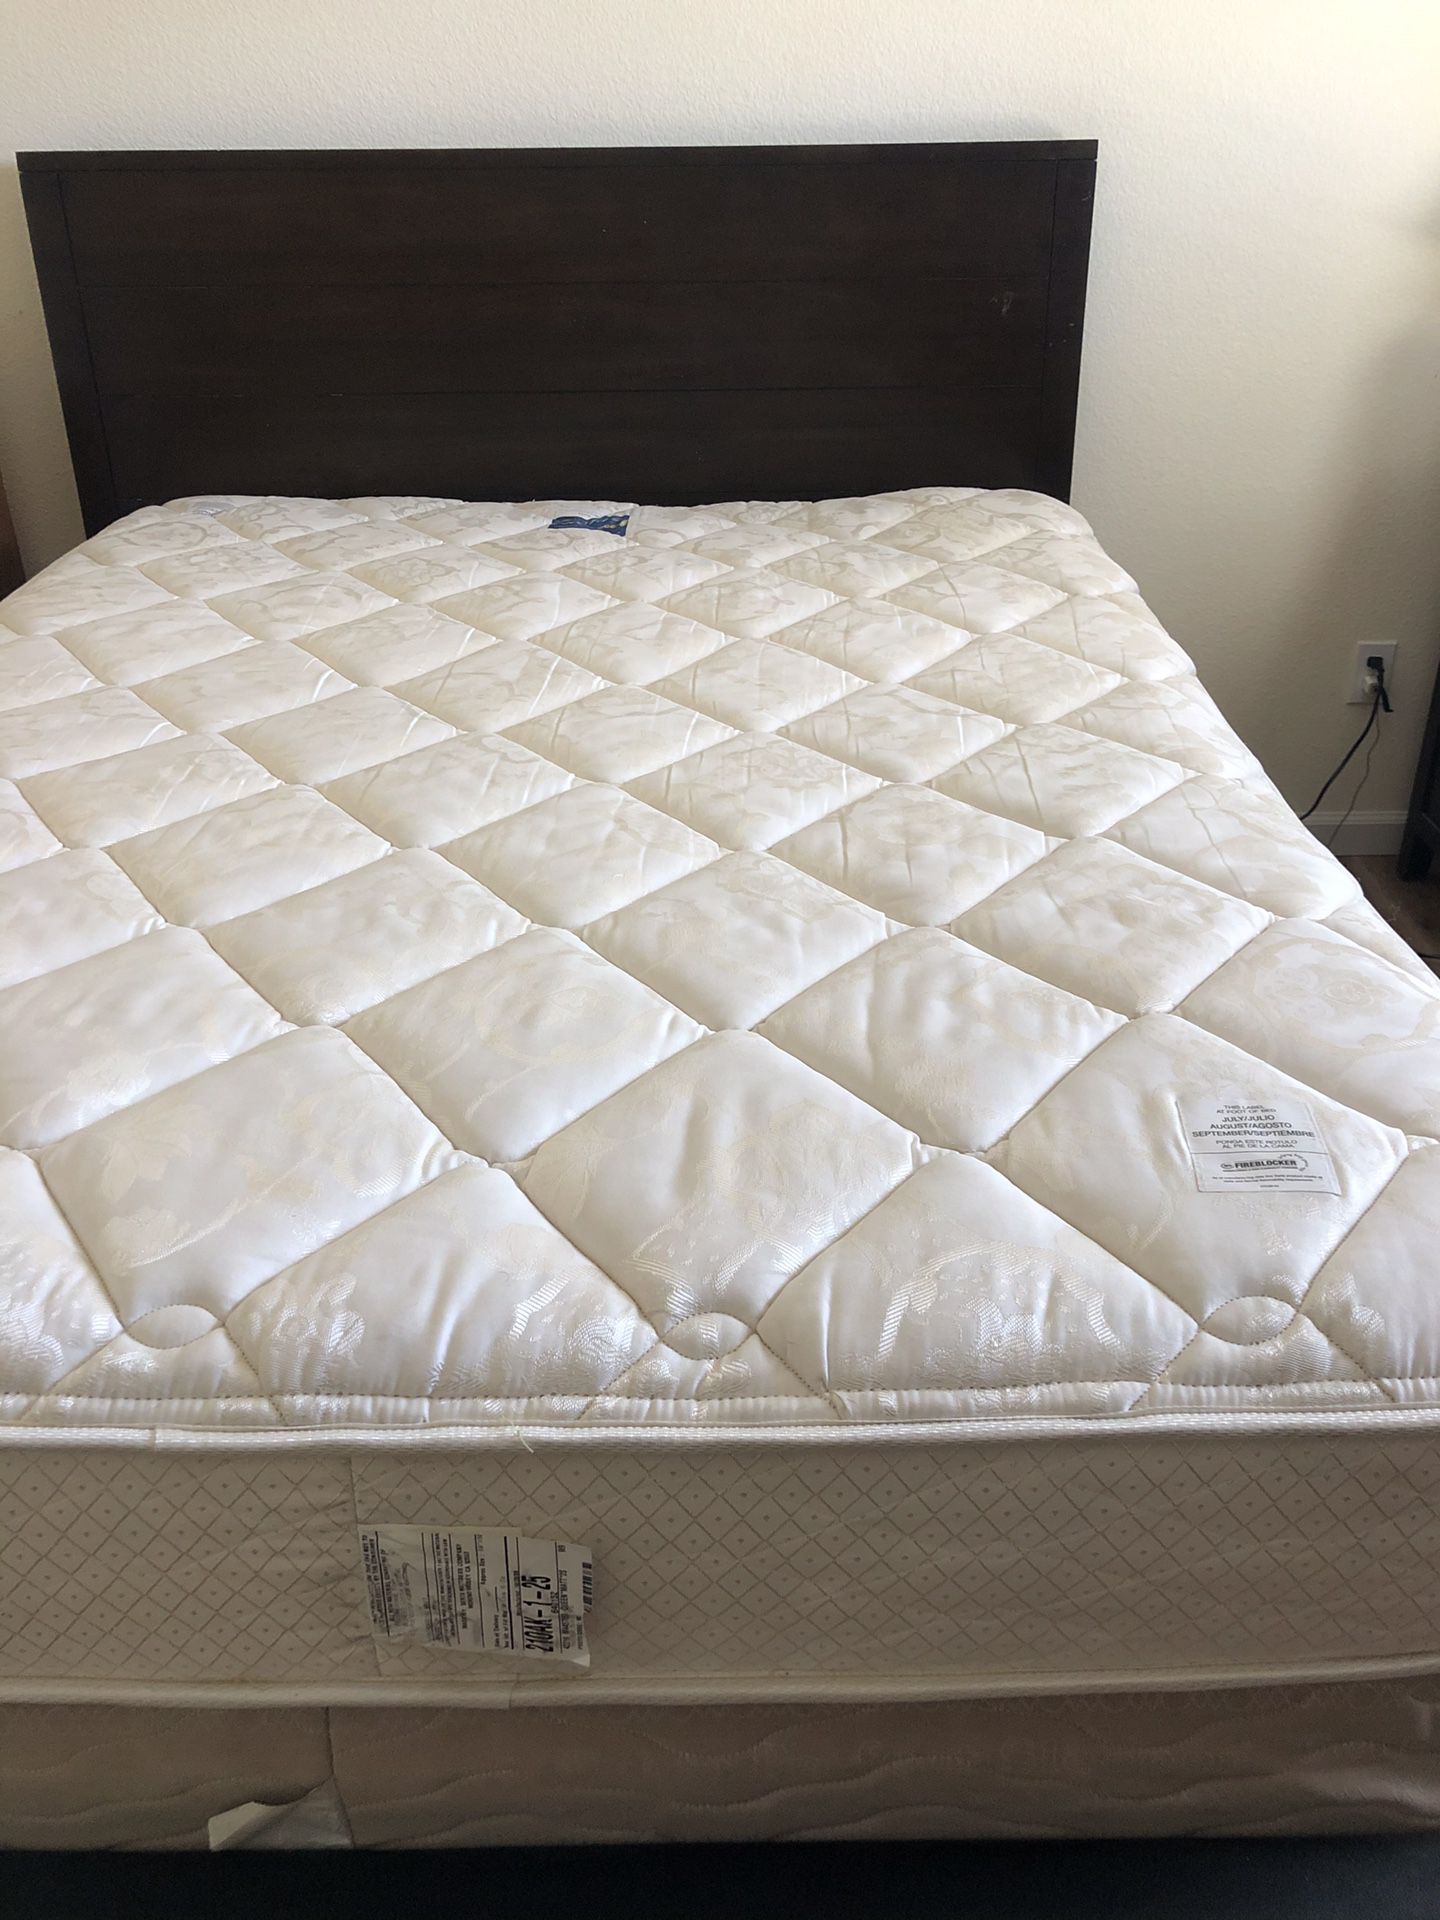 Queen size bed and frame